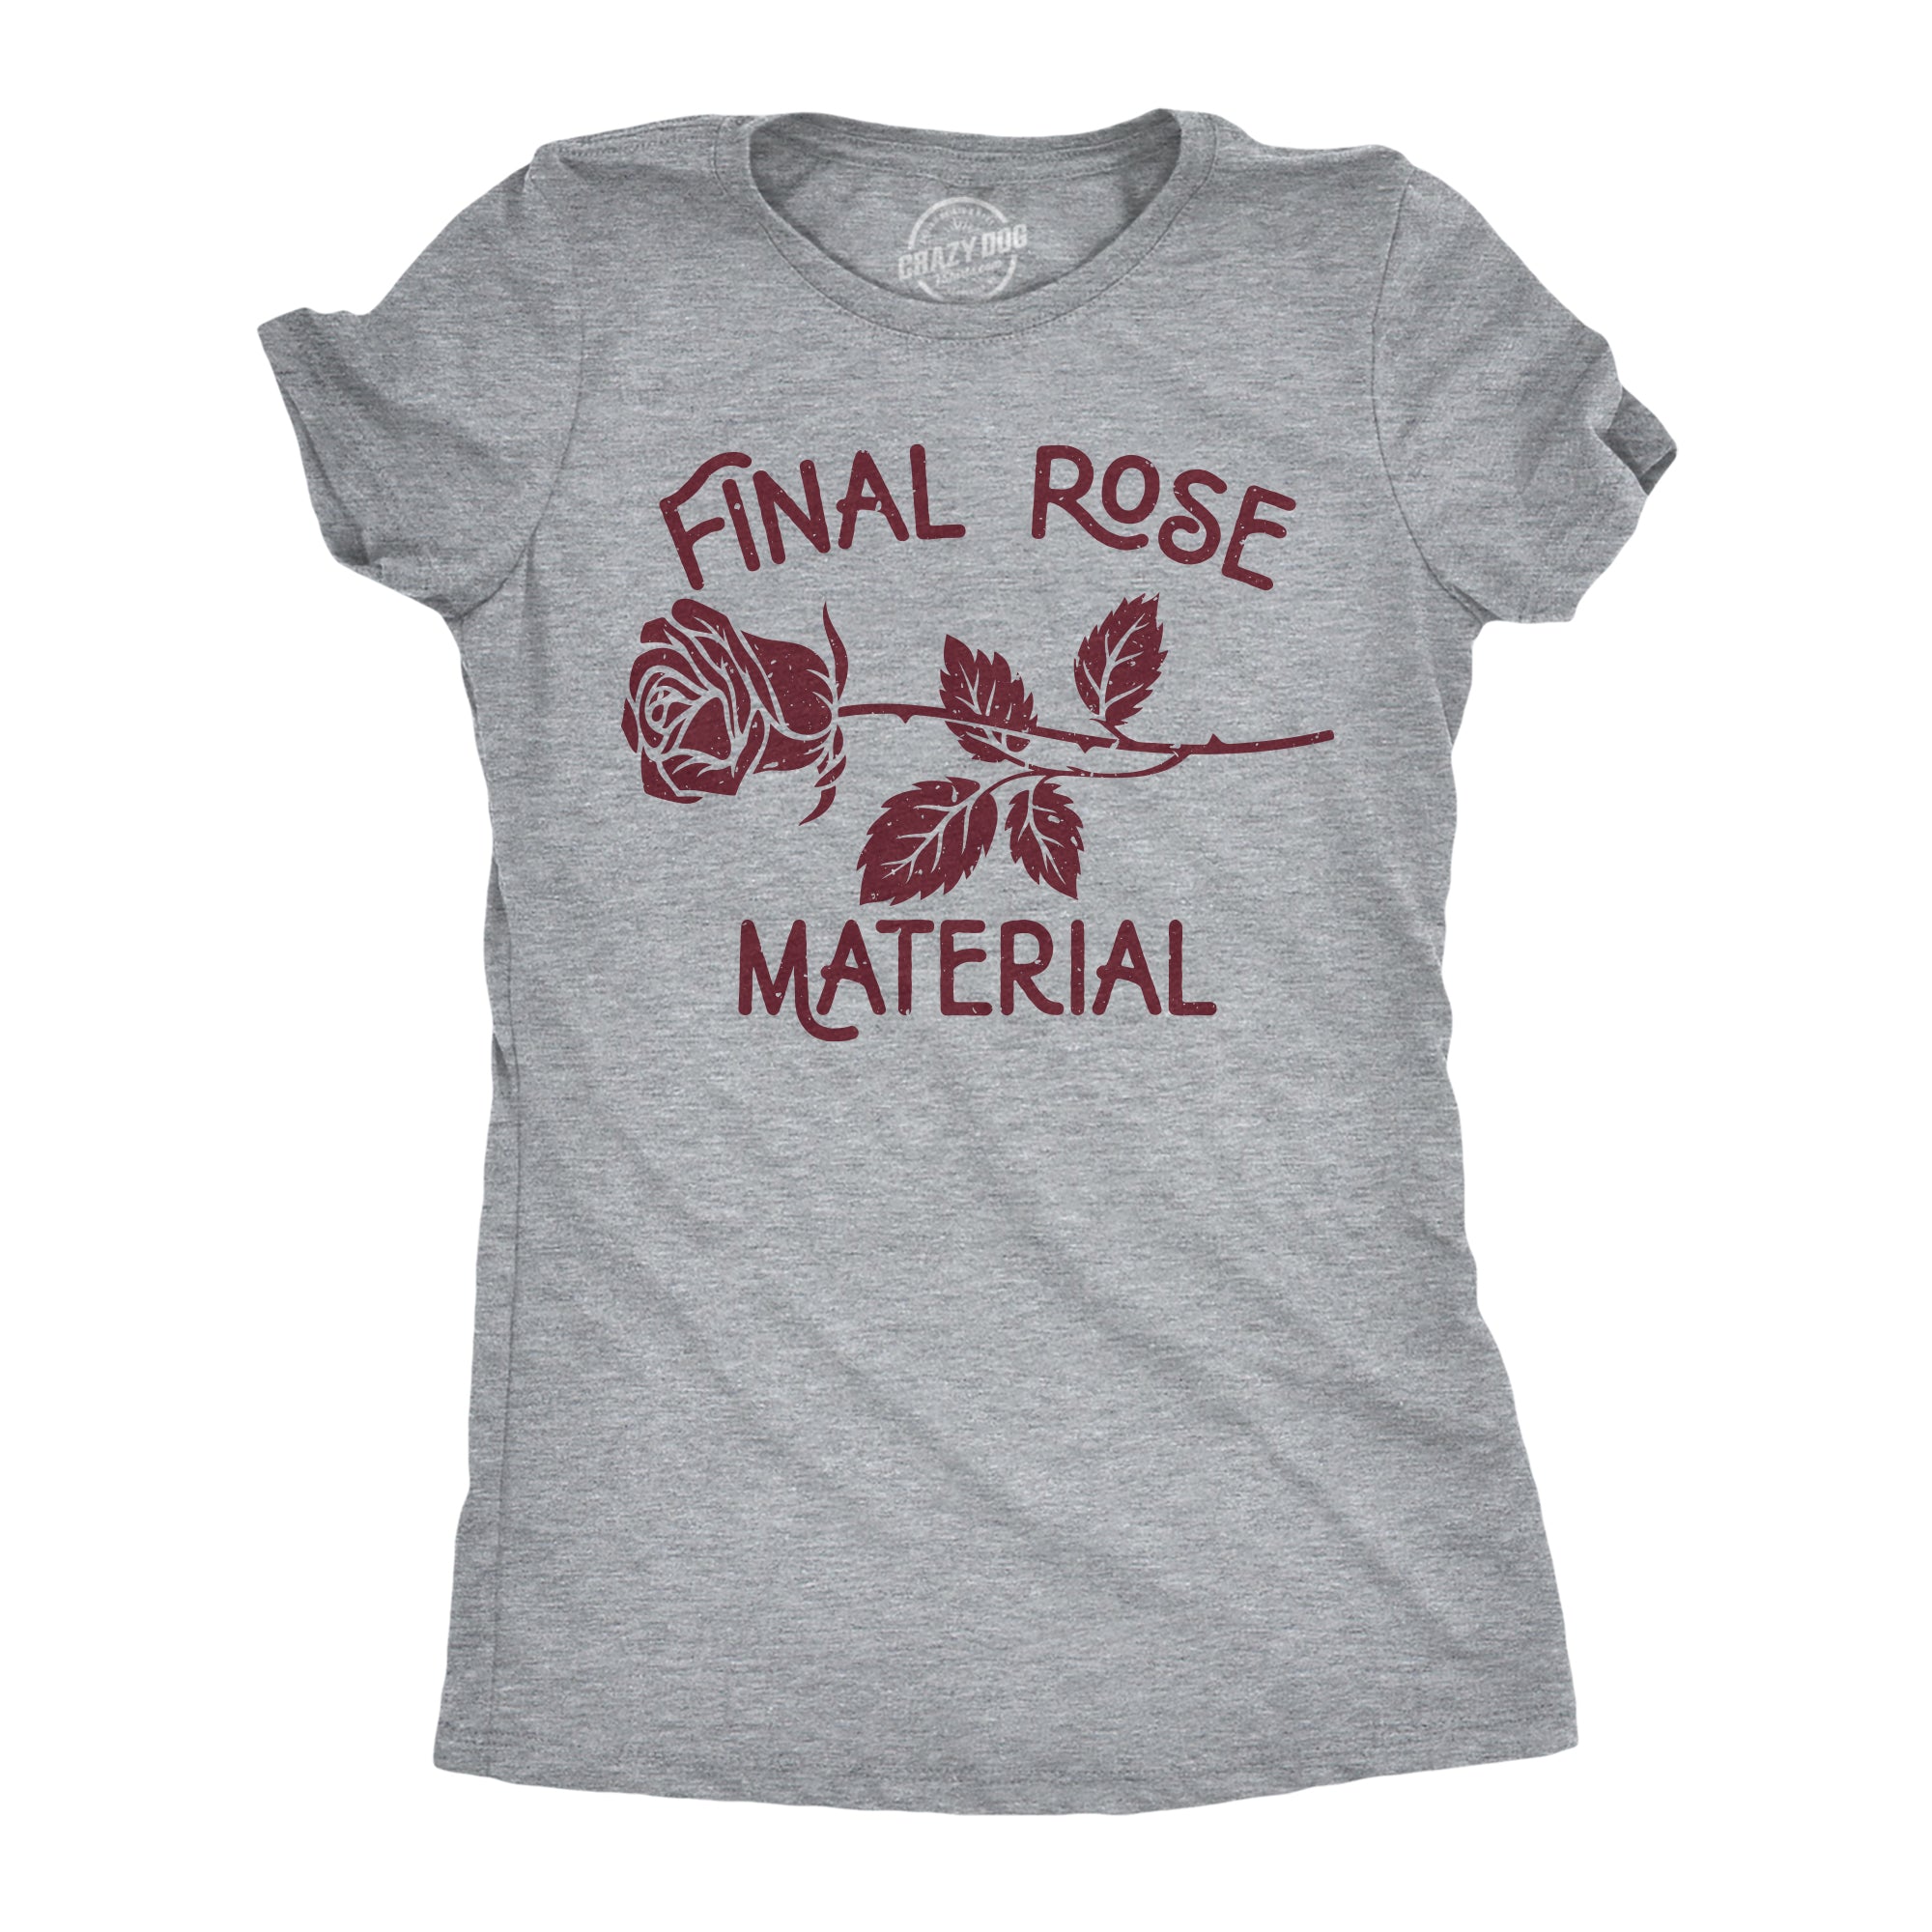 Funny Light Heather Grey - Final Rose Material Final Rose Material Womens T Shirt Nerdy Valentine's Day Tee